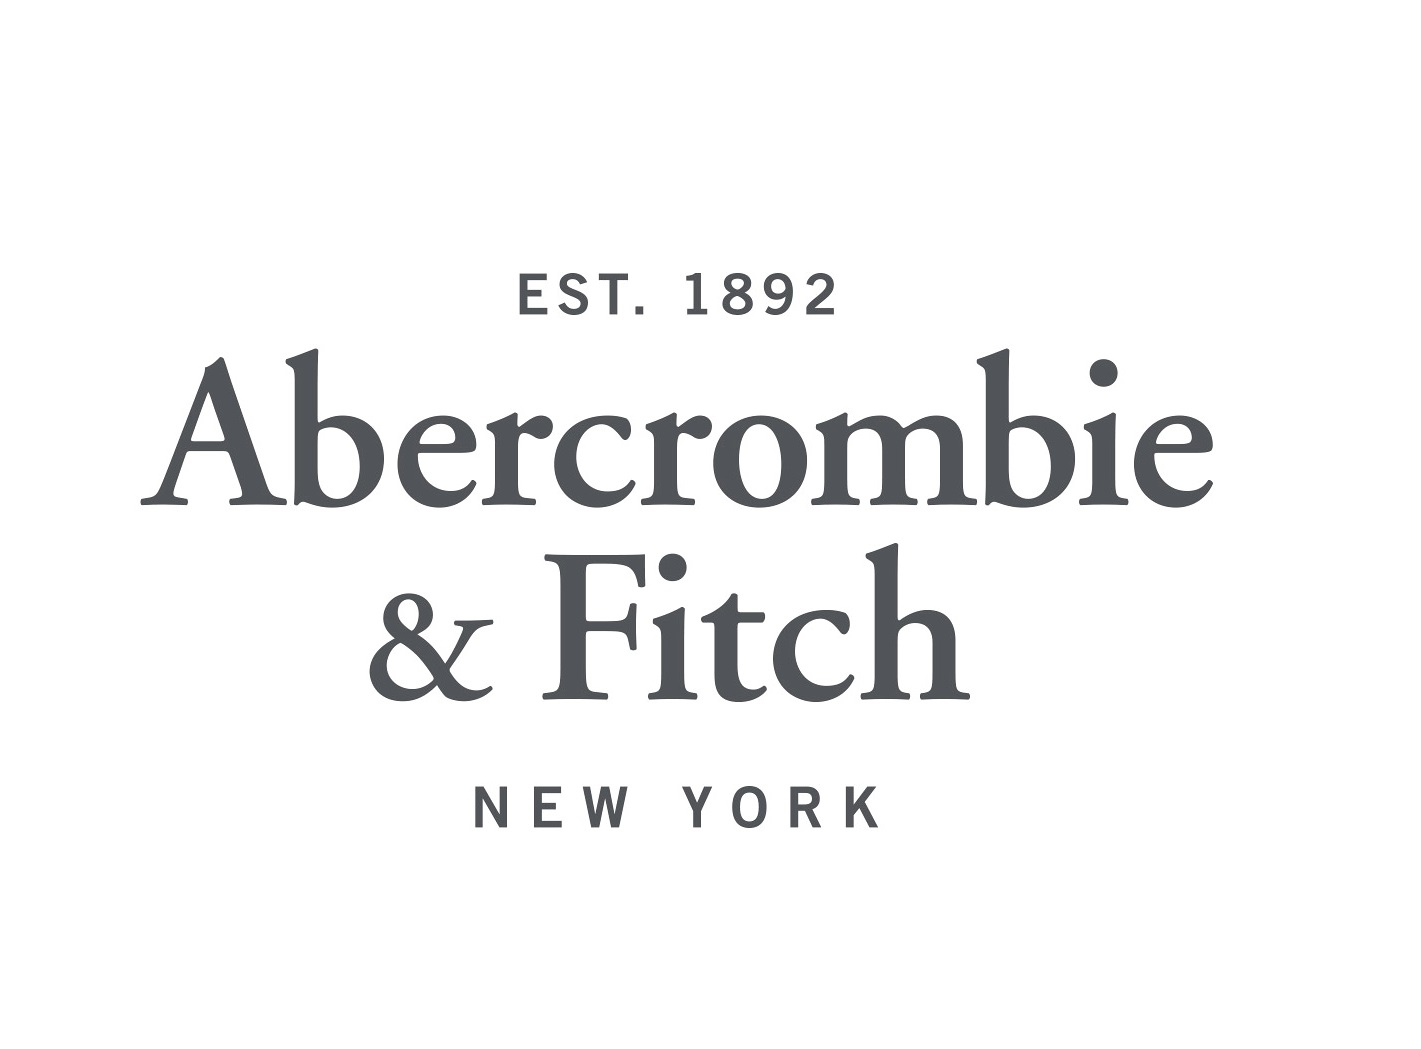 abercrombie and fitch perks at work